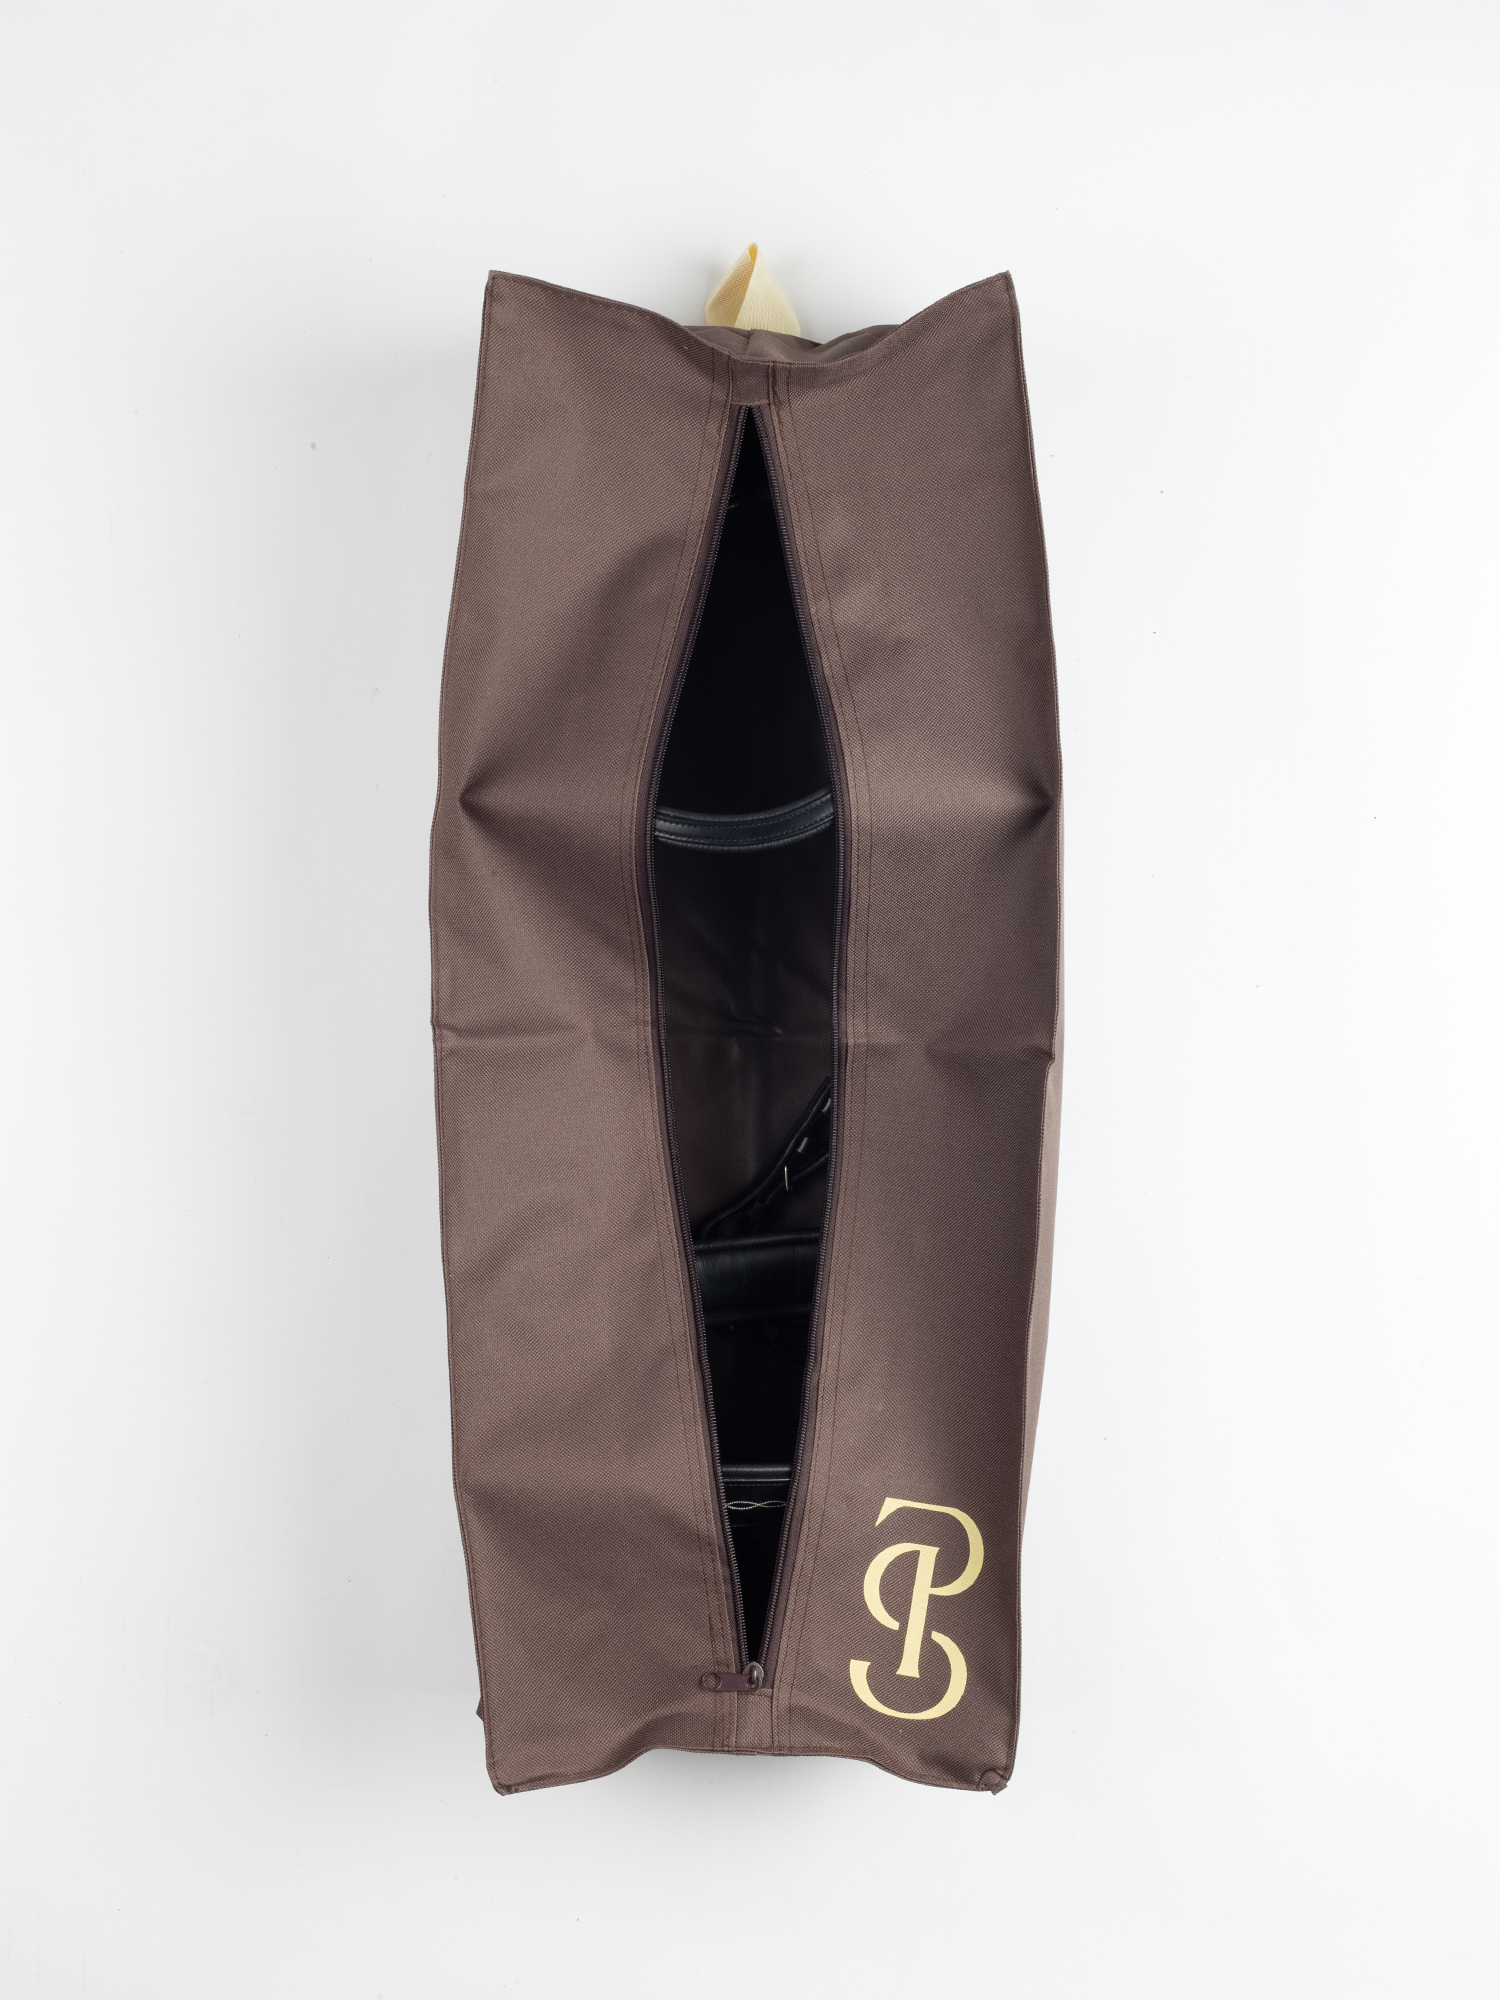 PS Bridle Bag • PS of Sweden PS